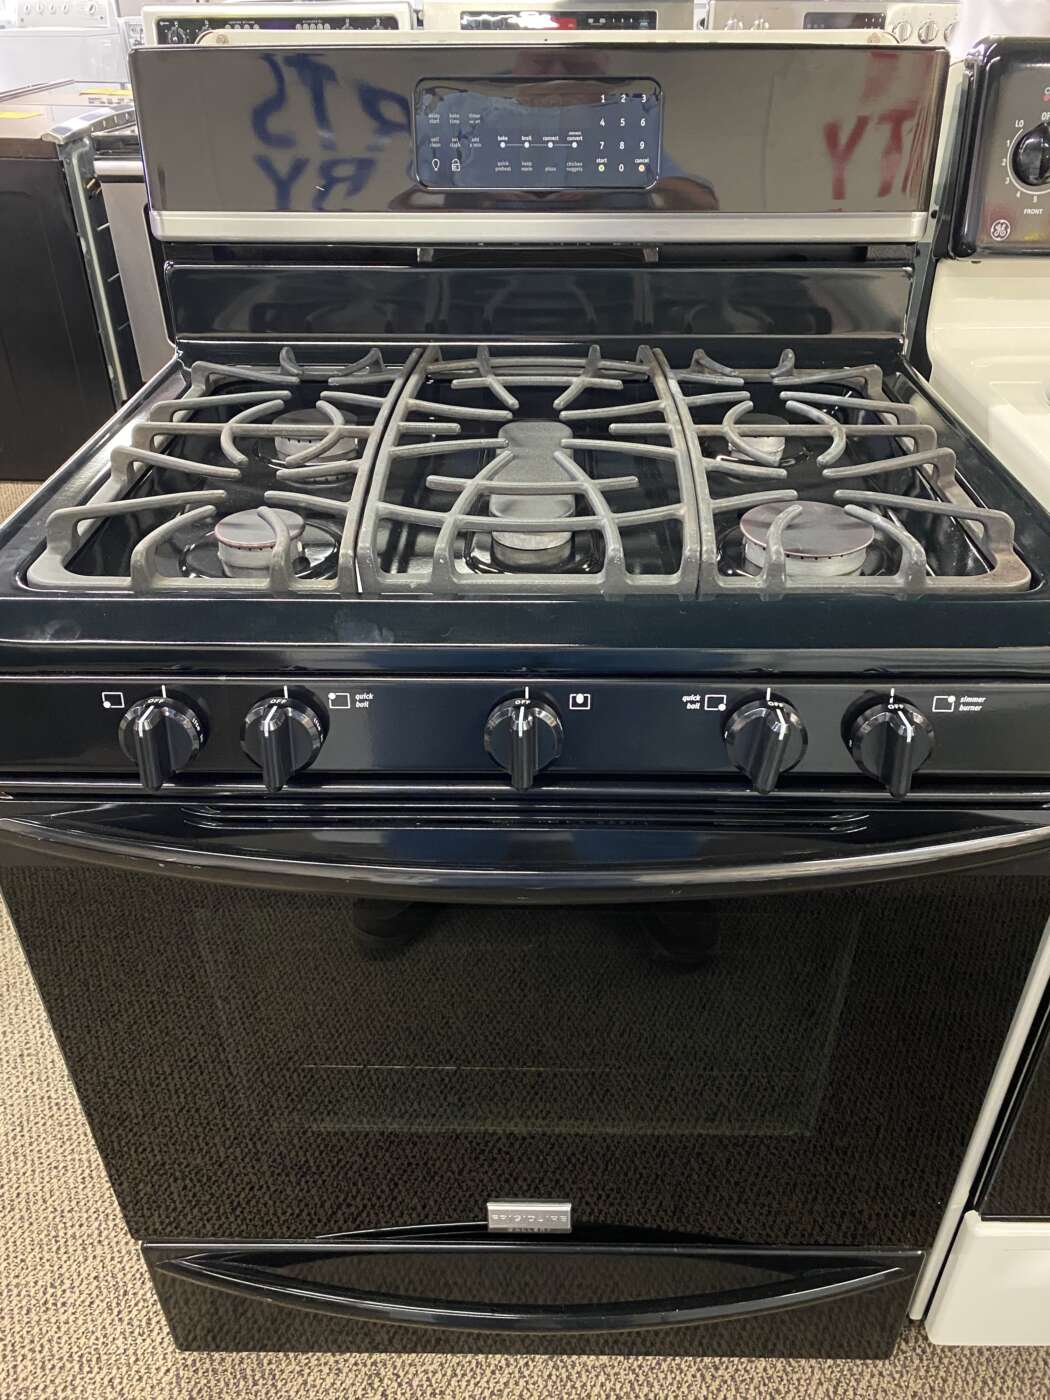 Reconditioned FRIGIDAIRE Self-Clean Convection-Oven GAS Range – Black